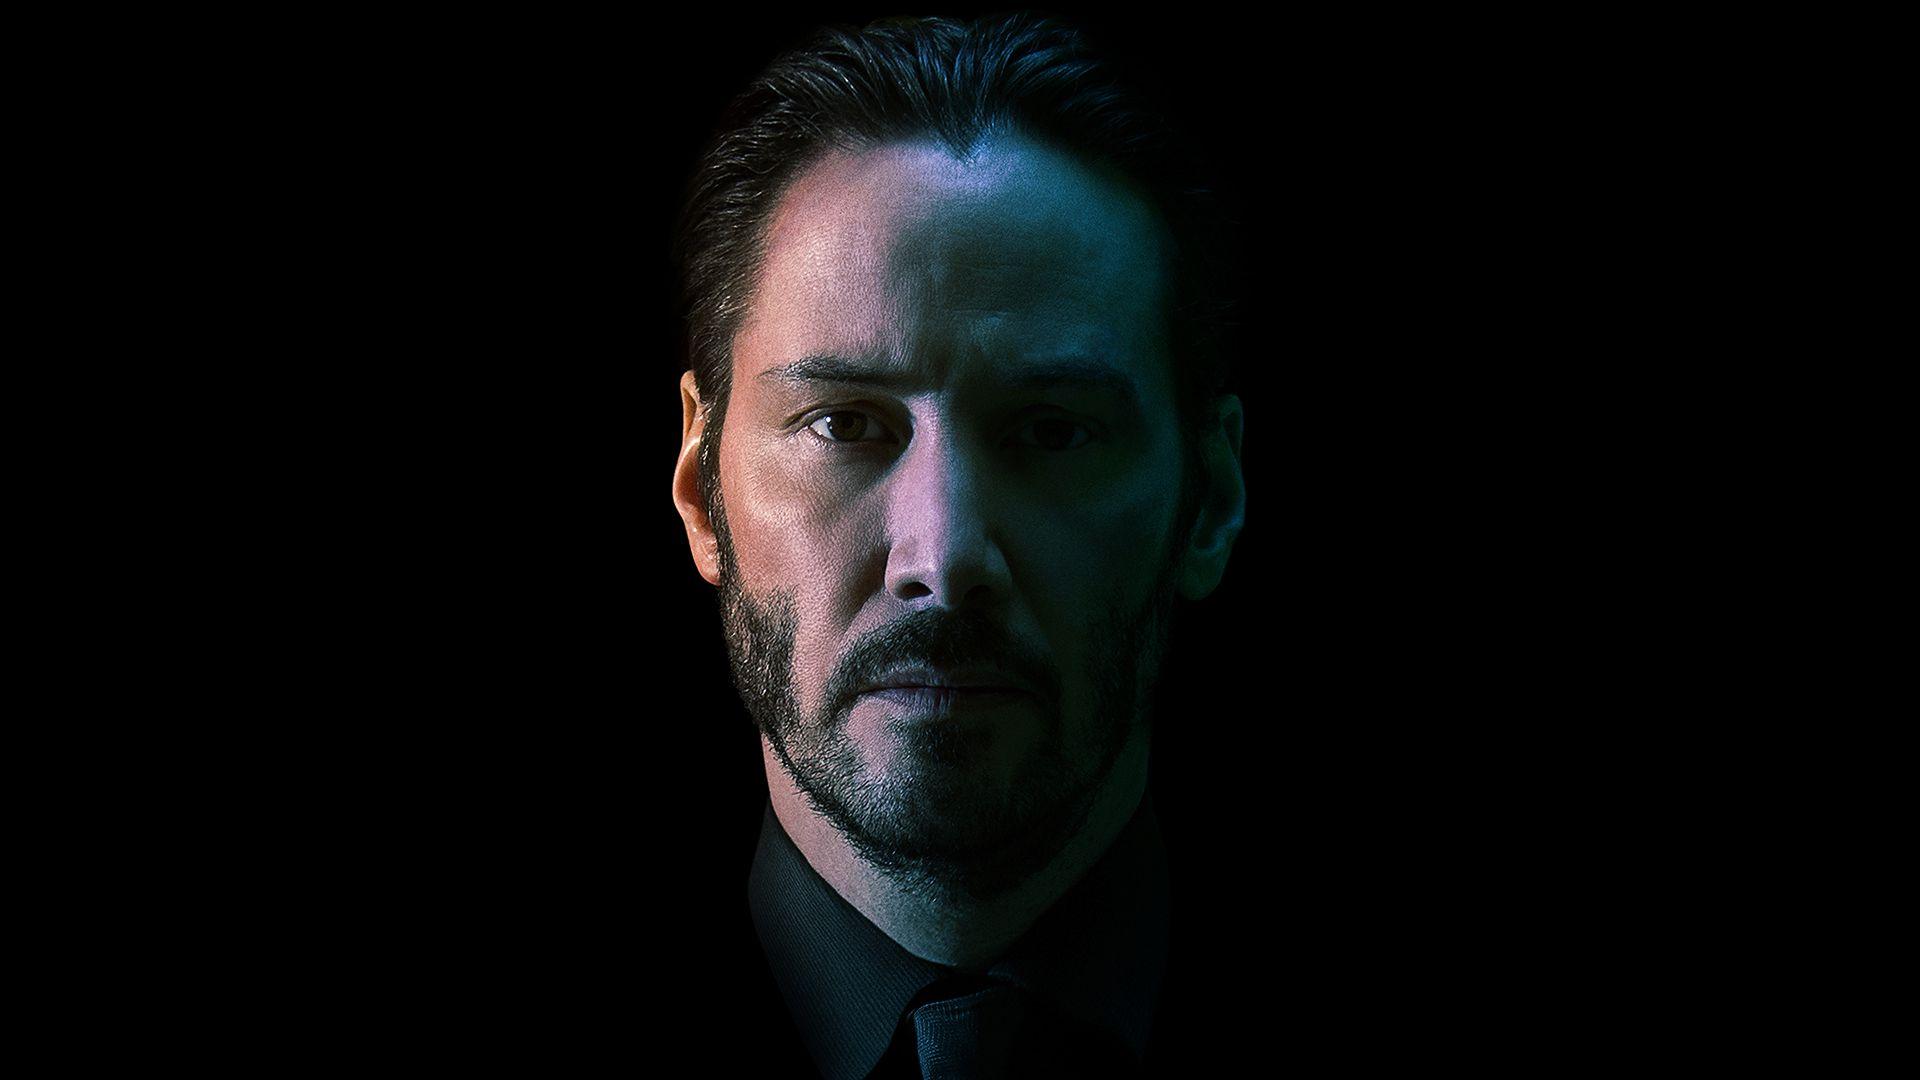 John Wick Wallpaper High Resolution and Quality Download